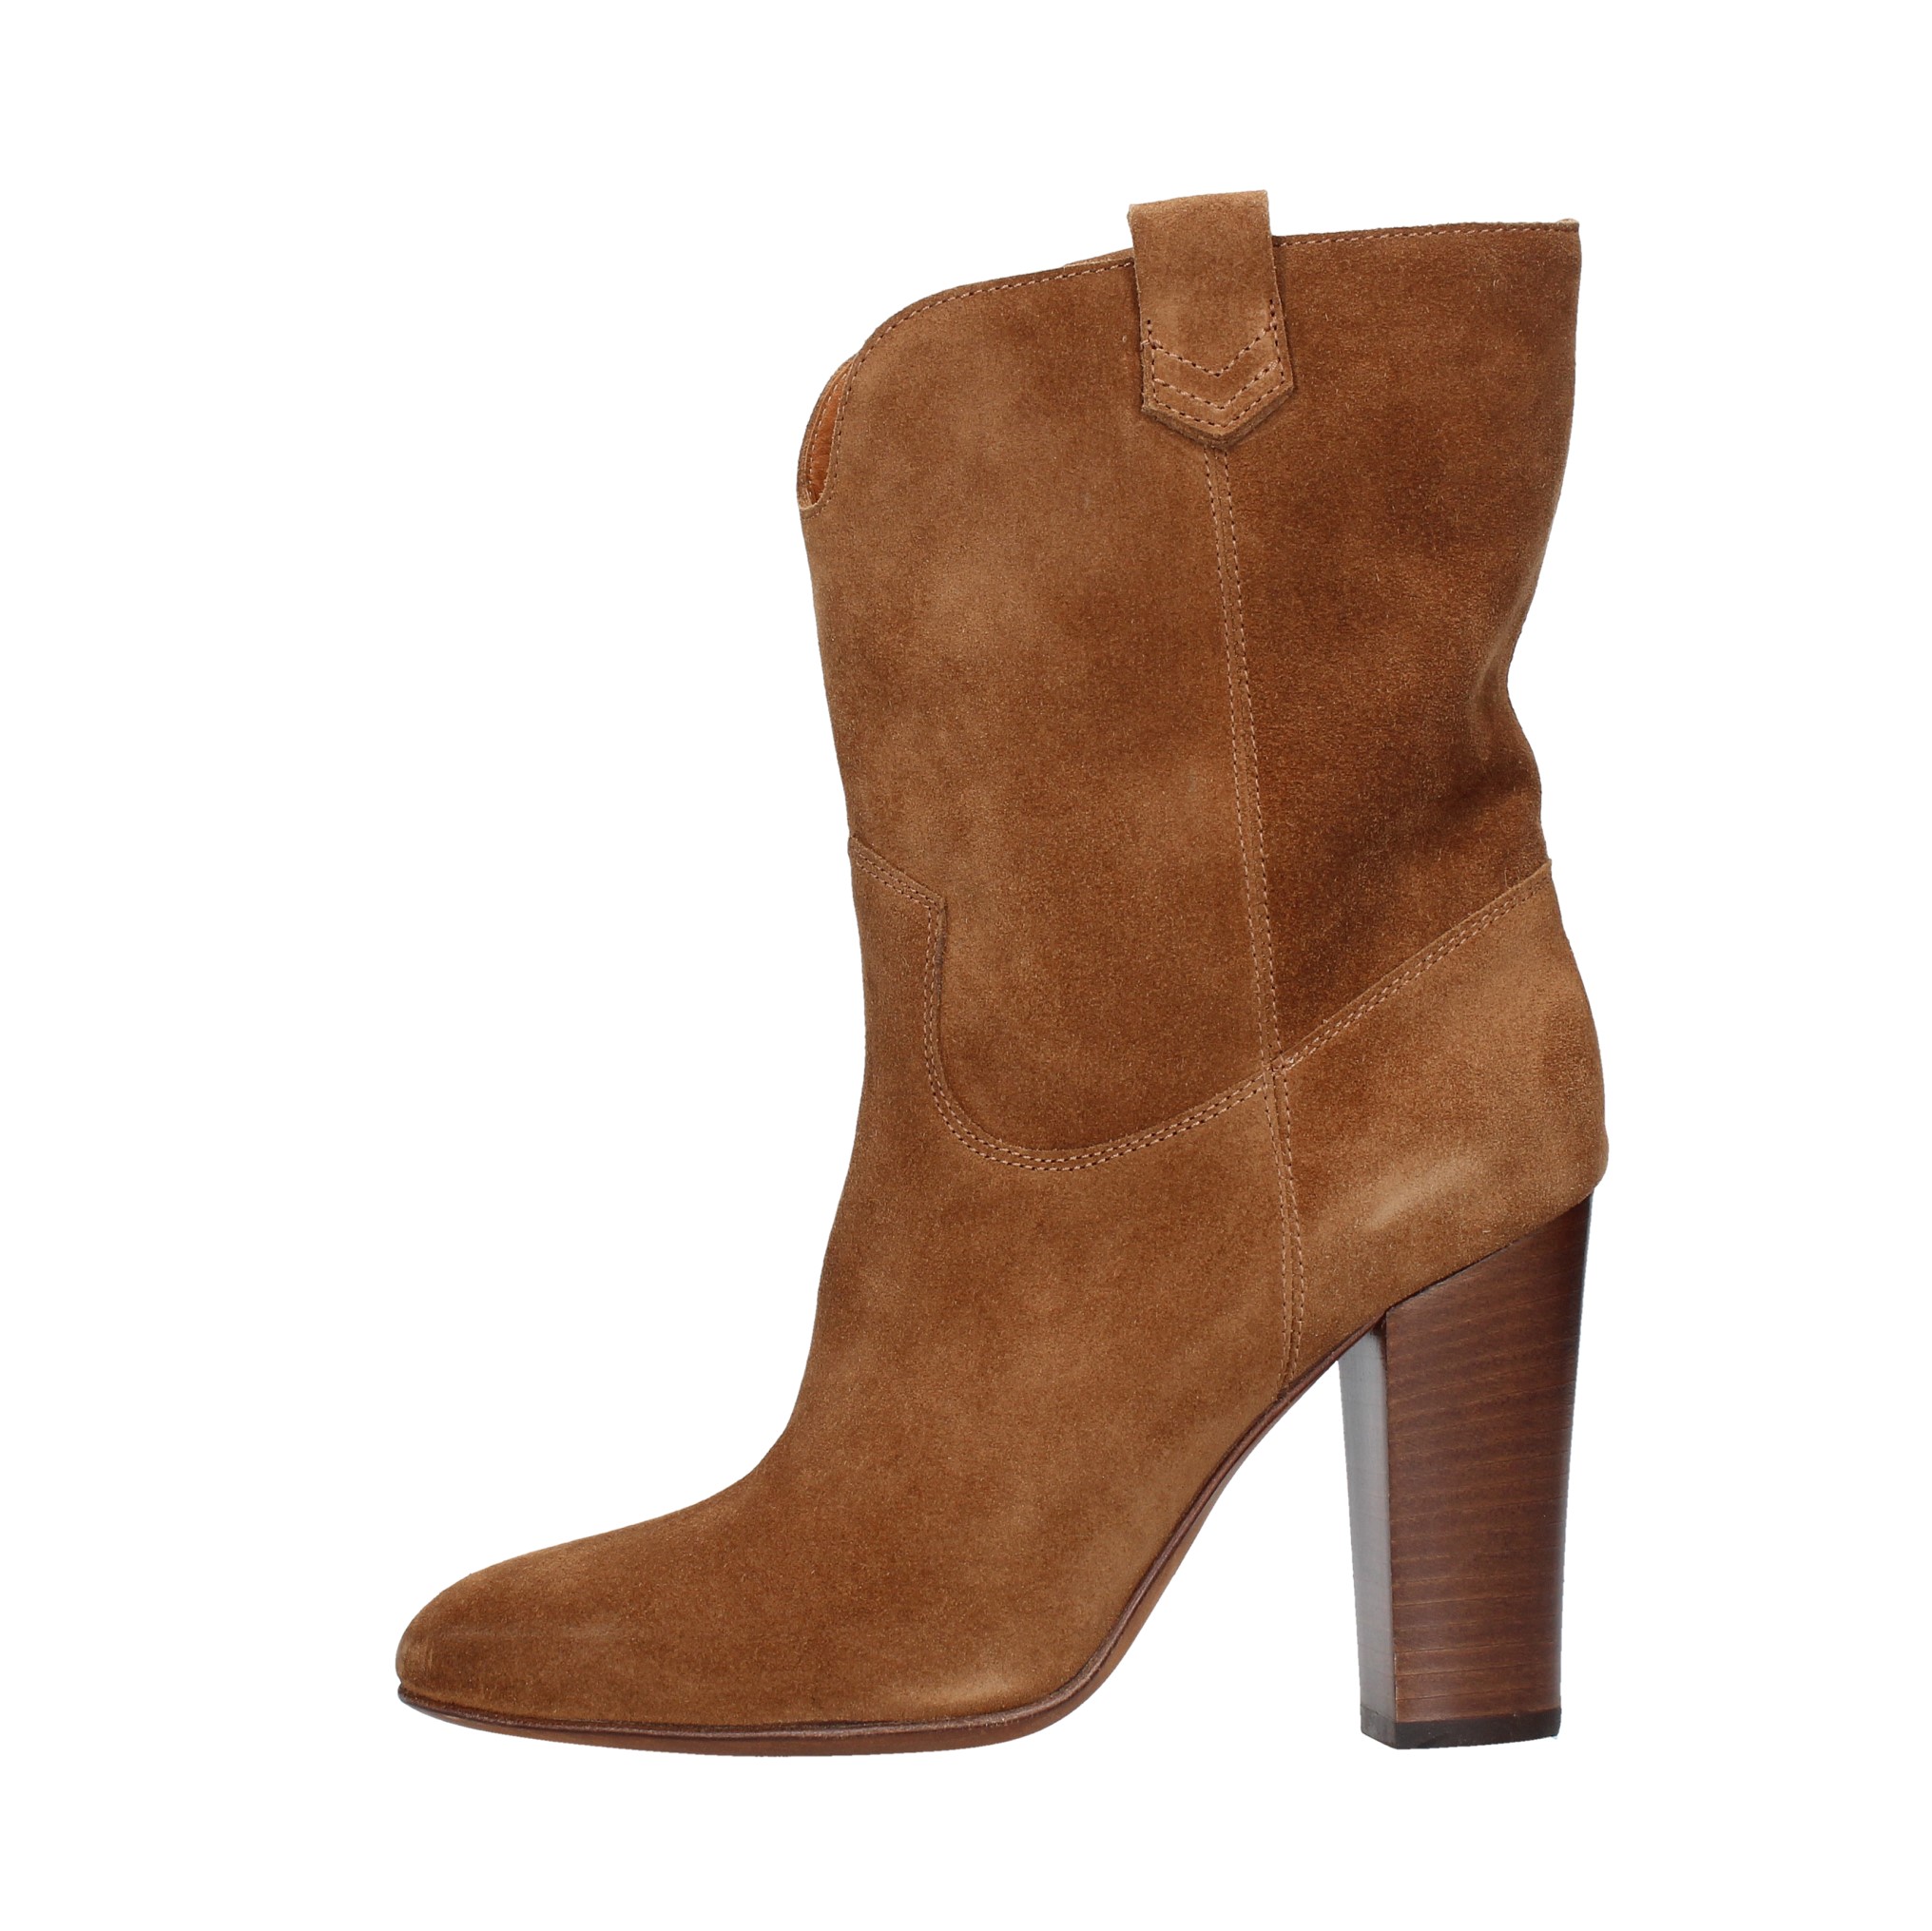 Ankle and ankle boots Cognac - BUTTERO - Ginevra calzature